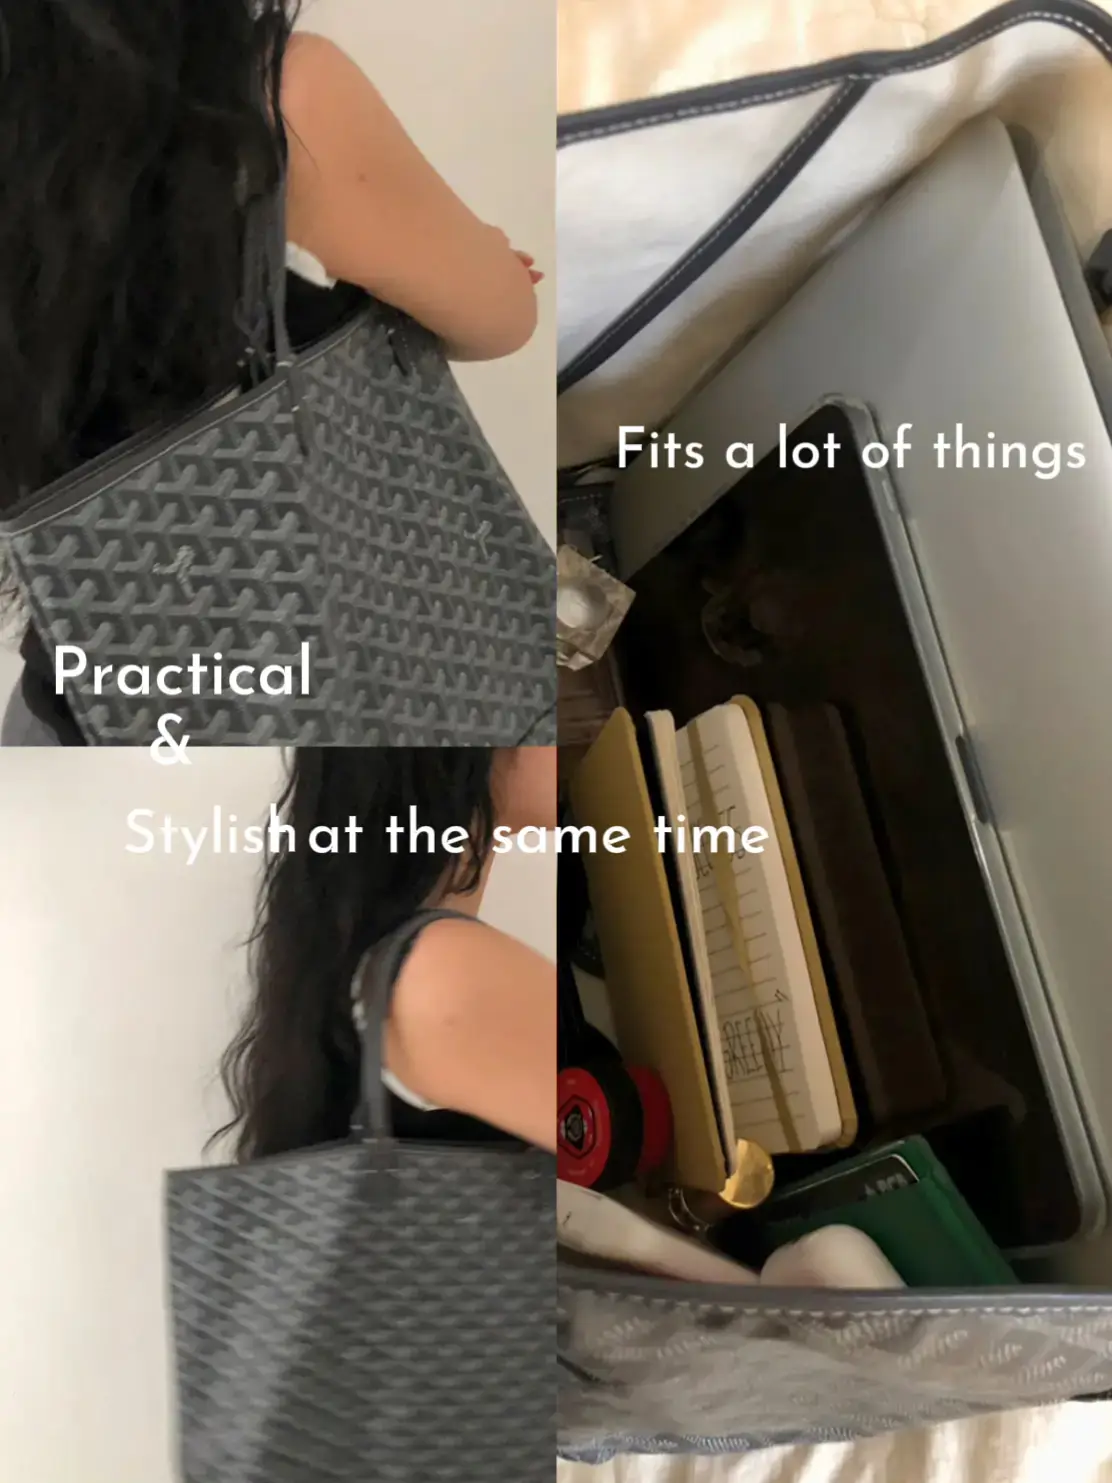 Goyard Saint Louis tote bag review and how to care - With Love Lily Rose